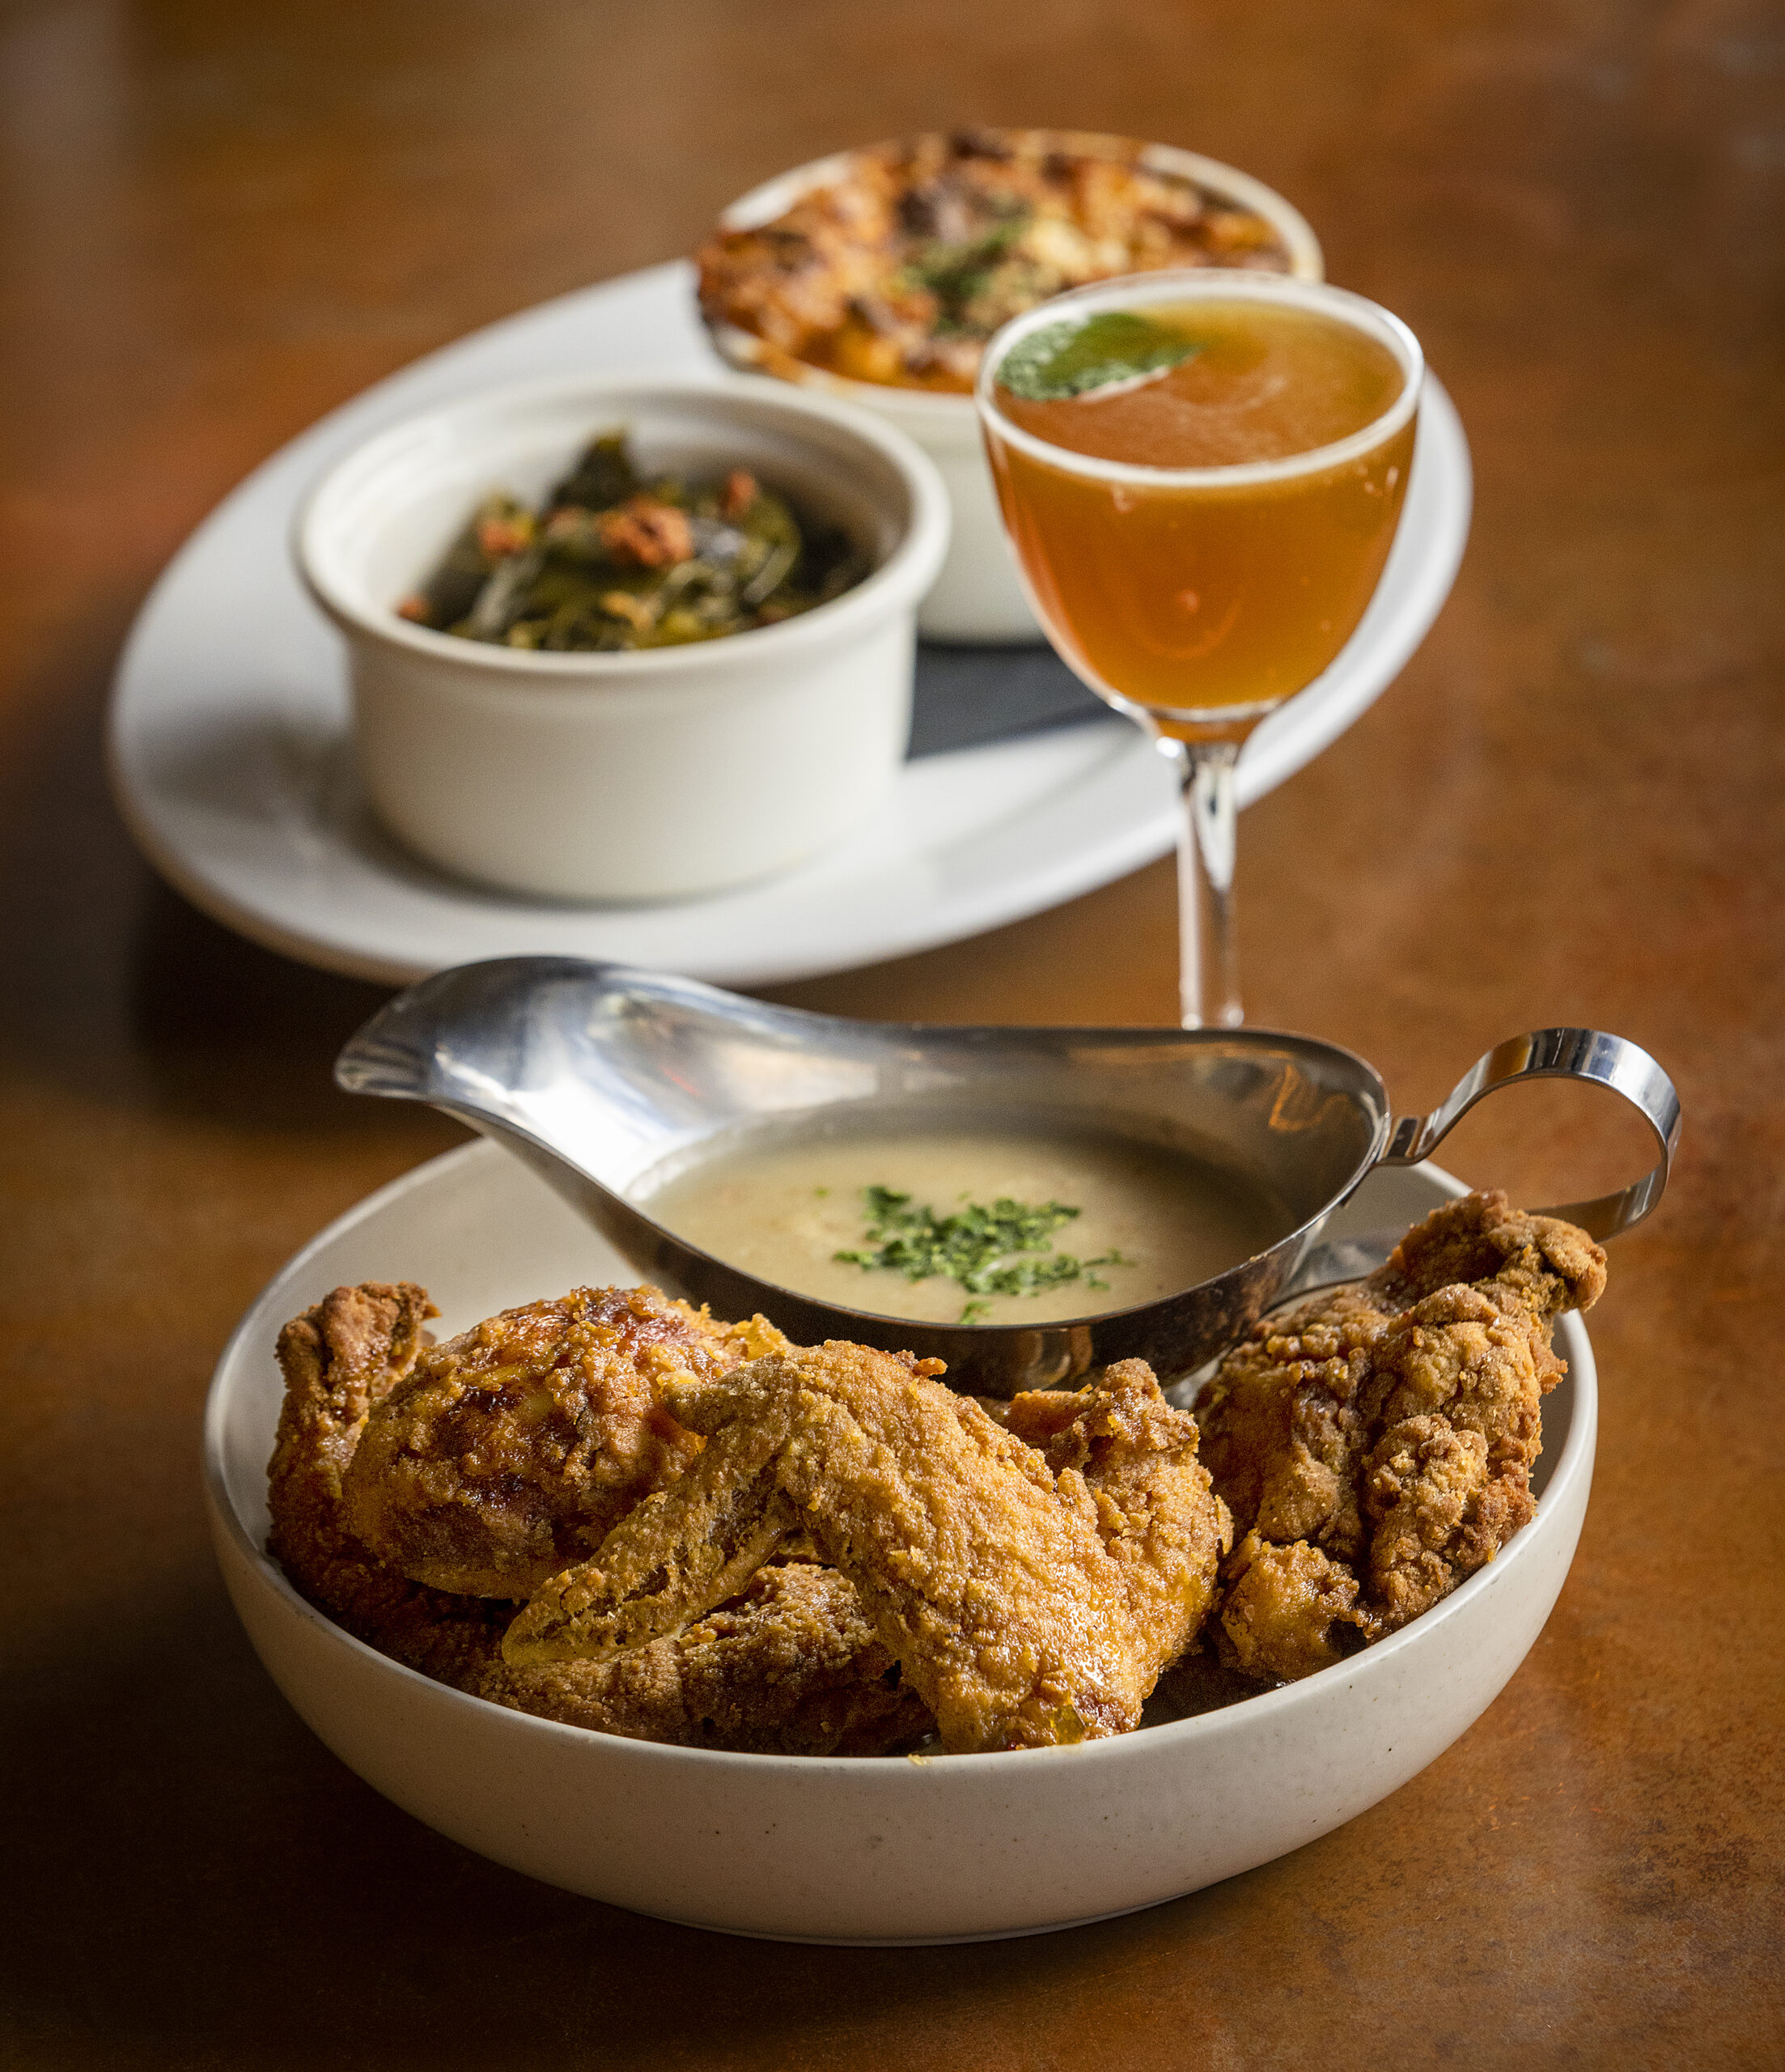 Southern Fried Chicken Dinner with leftover collards, mac n cheese, bacon truffle gravy and Calabrian chili honey with The Derby Cocktail from Easy Rider in Petaluma. (John Burgess/The Press Democrat)